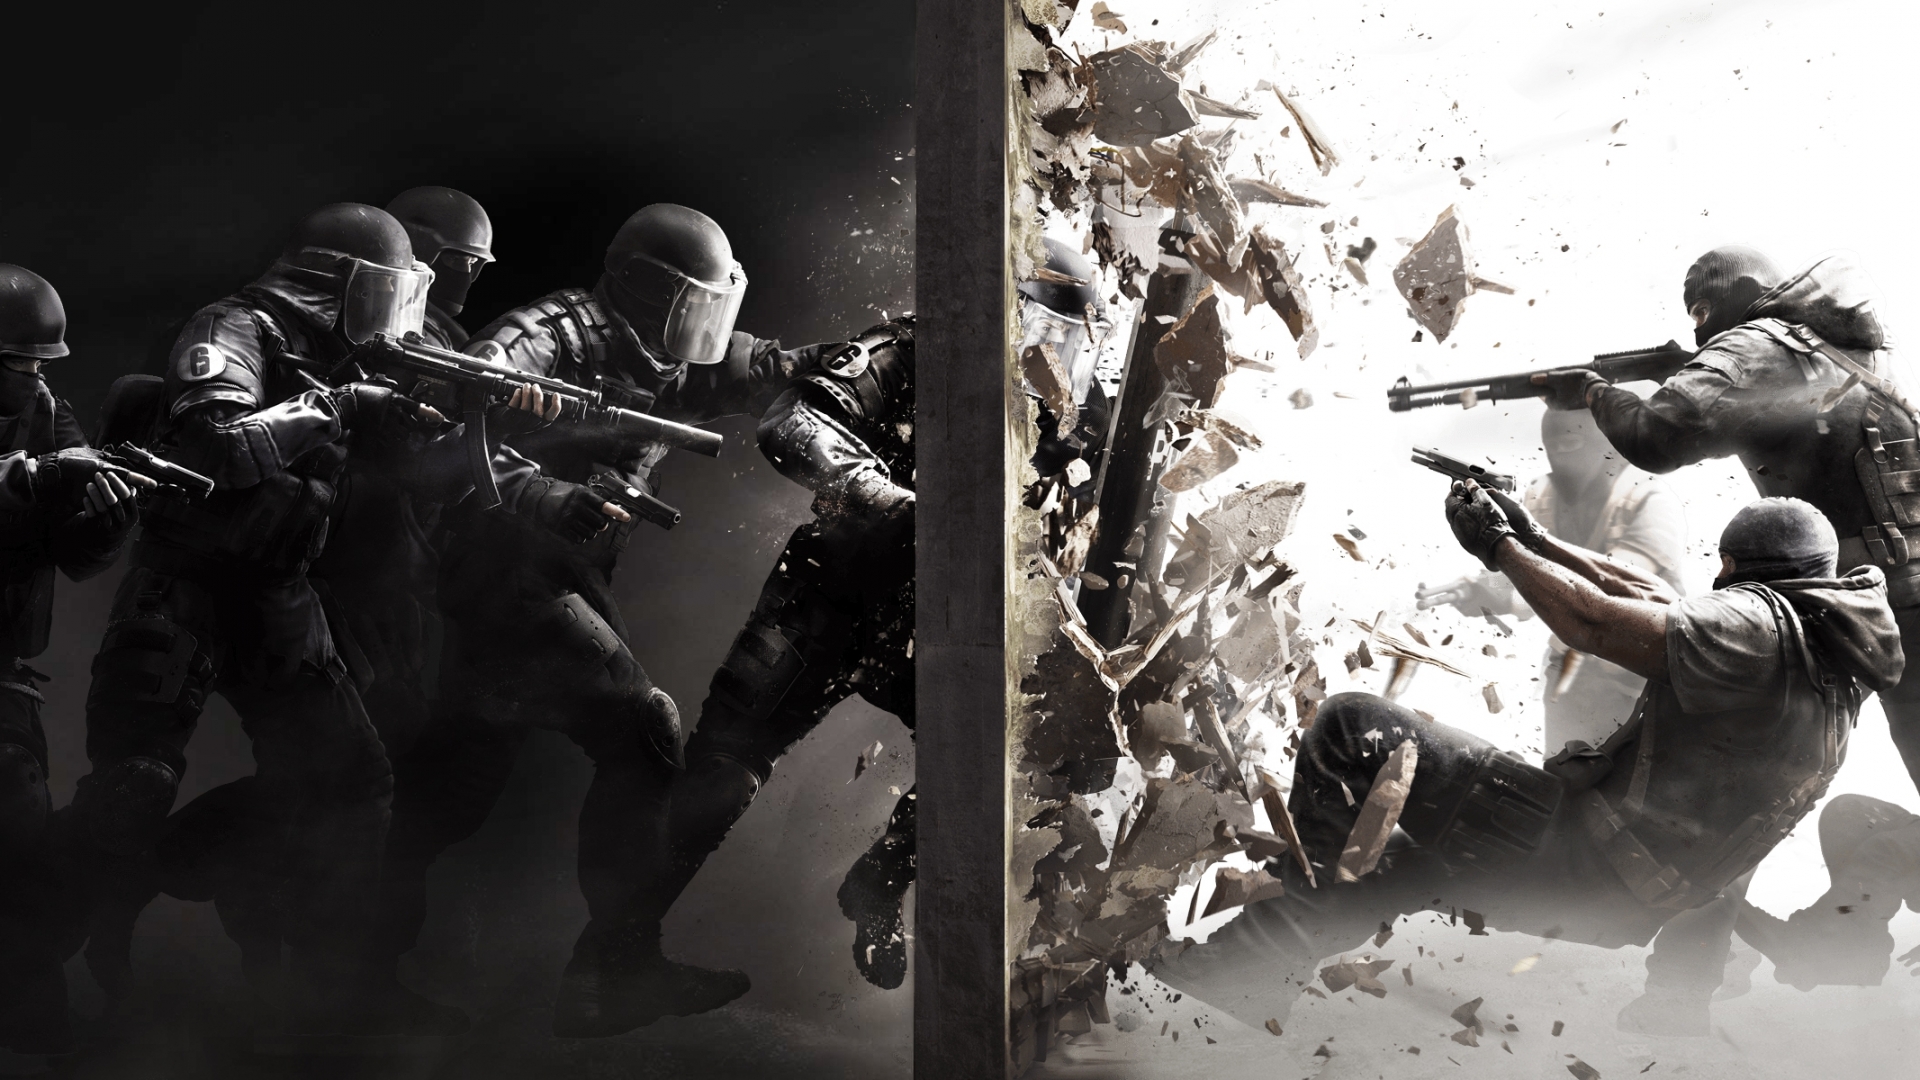 rainbow six siege wallpaper,soldier,infantry,military,army,army men